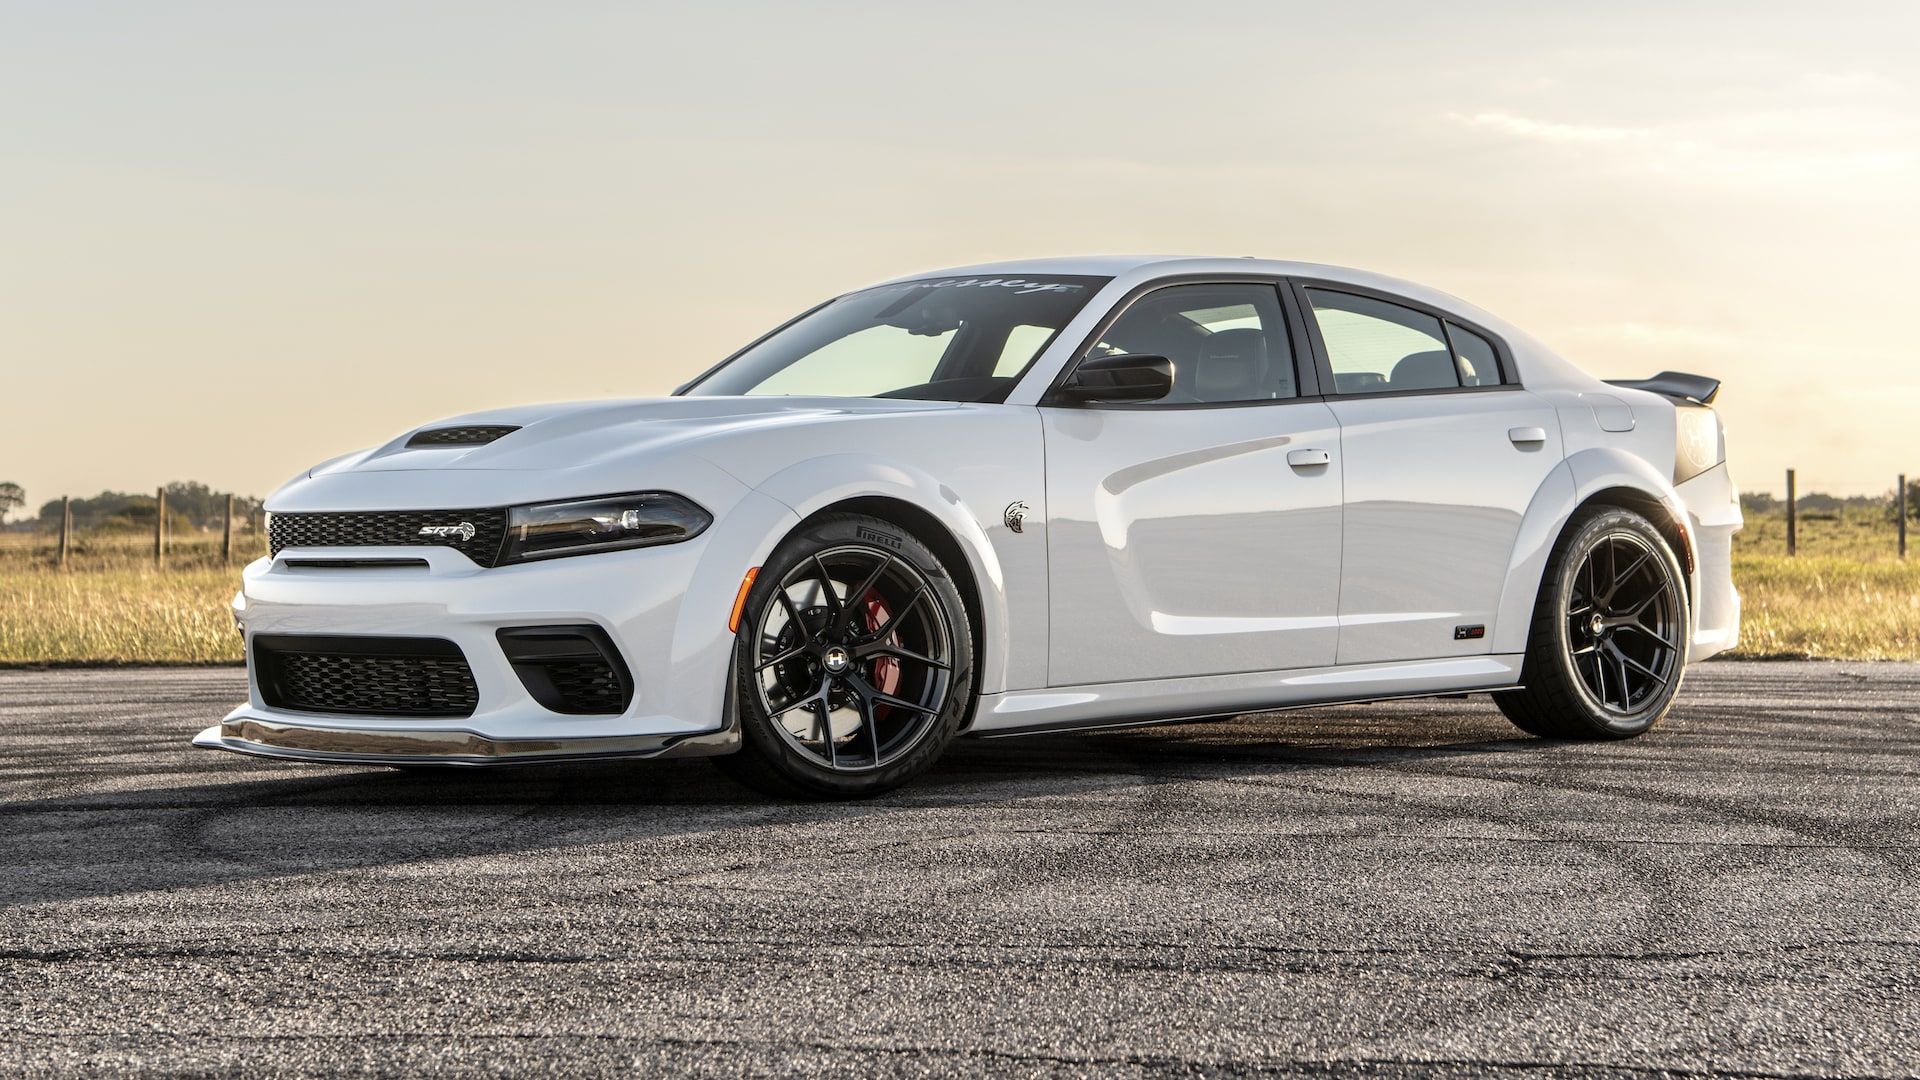 Hennessey Performance Dodge SRT Charger Last Stand